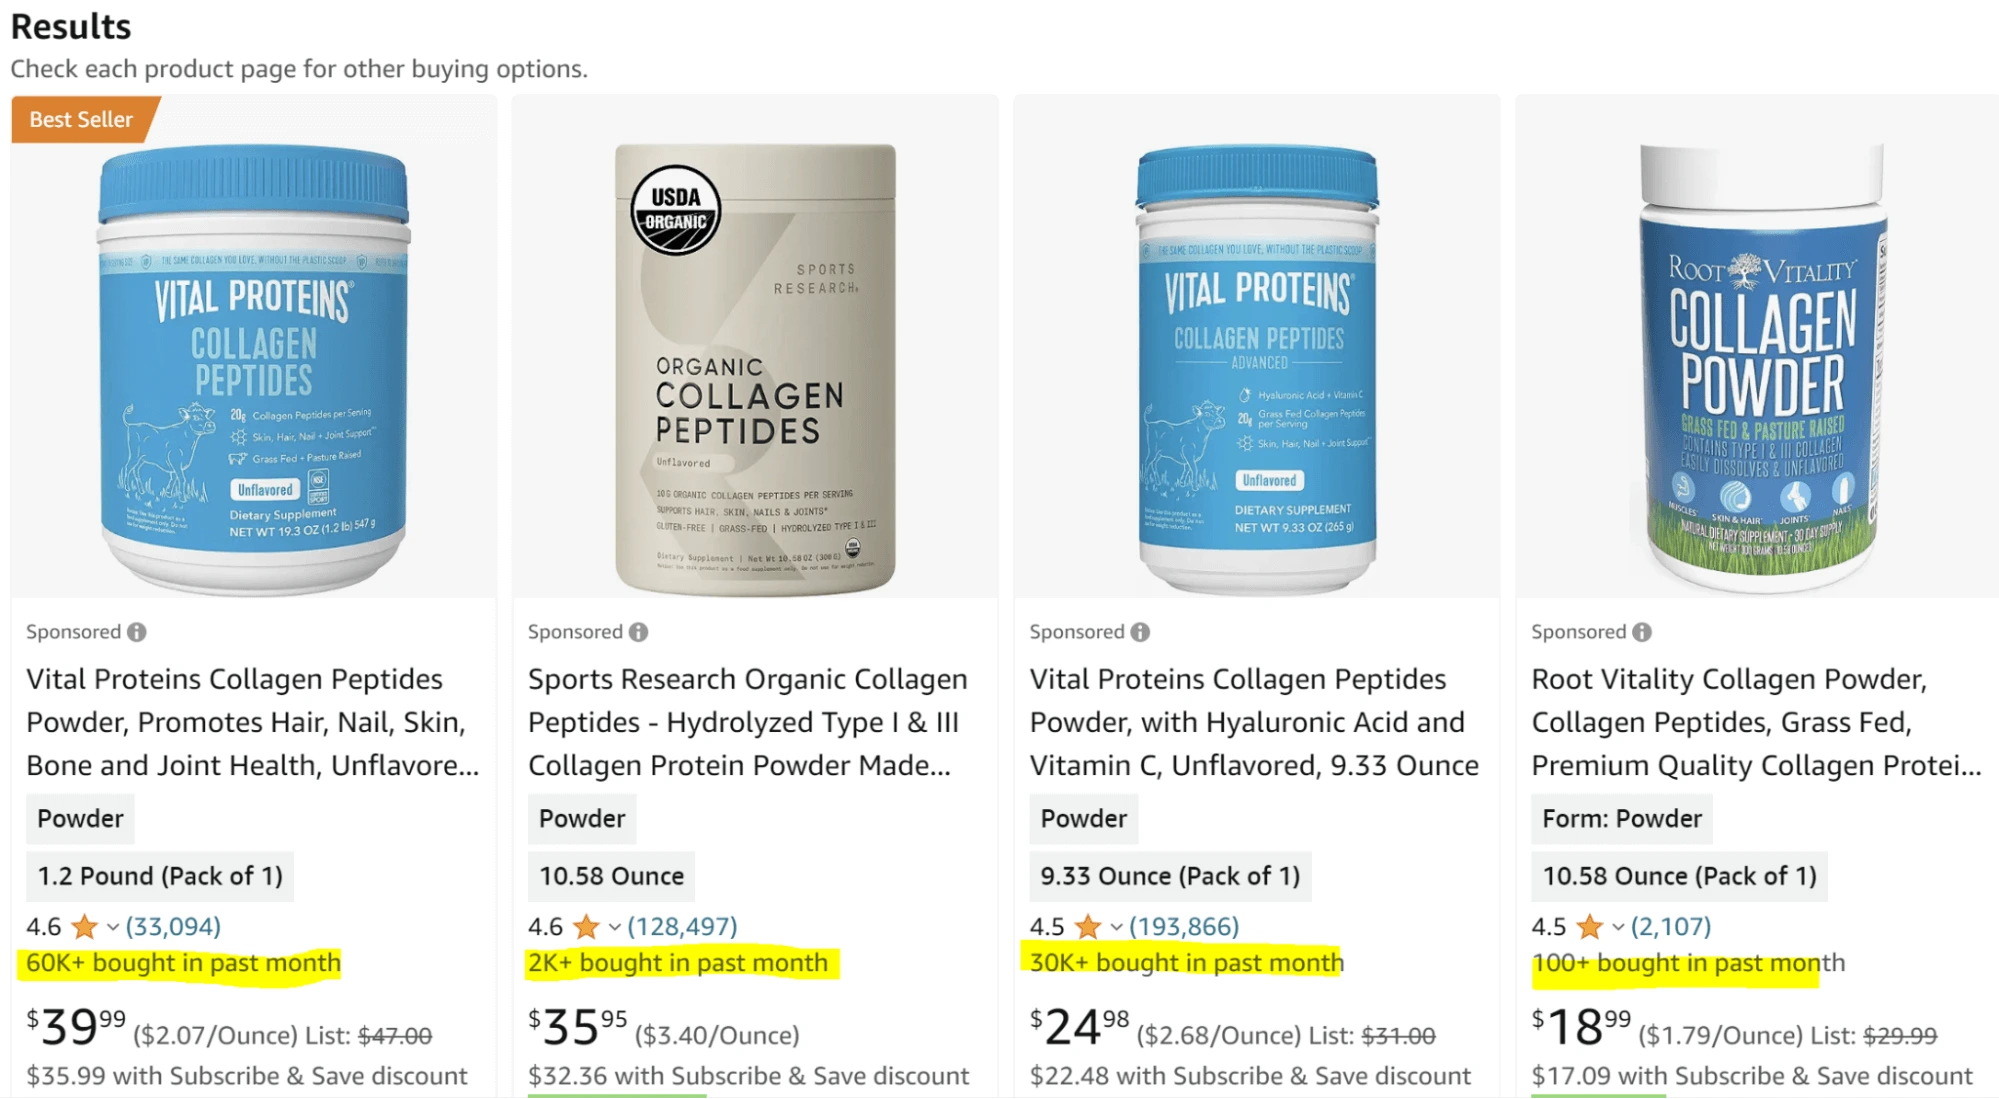 Amazon results show estimates and view of products